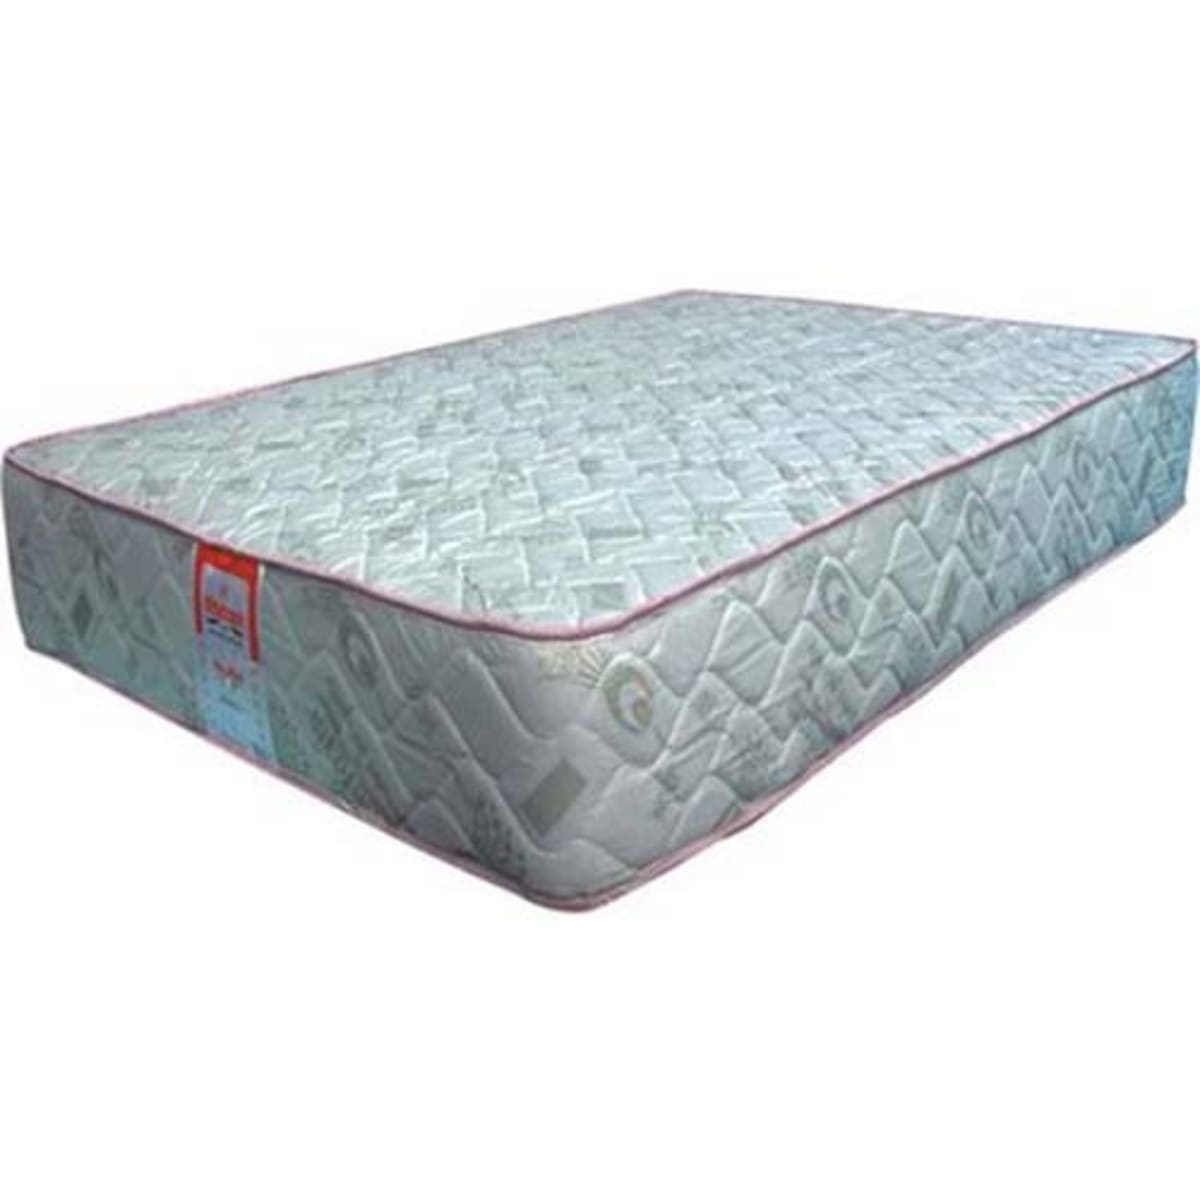 Between normal, orthopaedic and semi orthopaedic mattress, which is better?